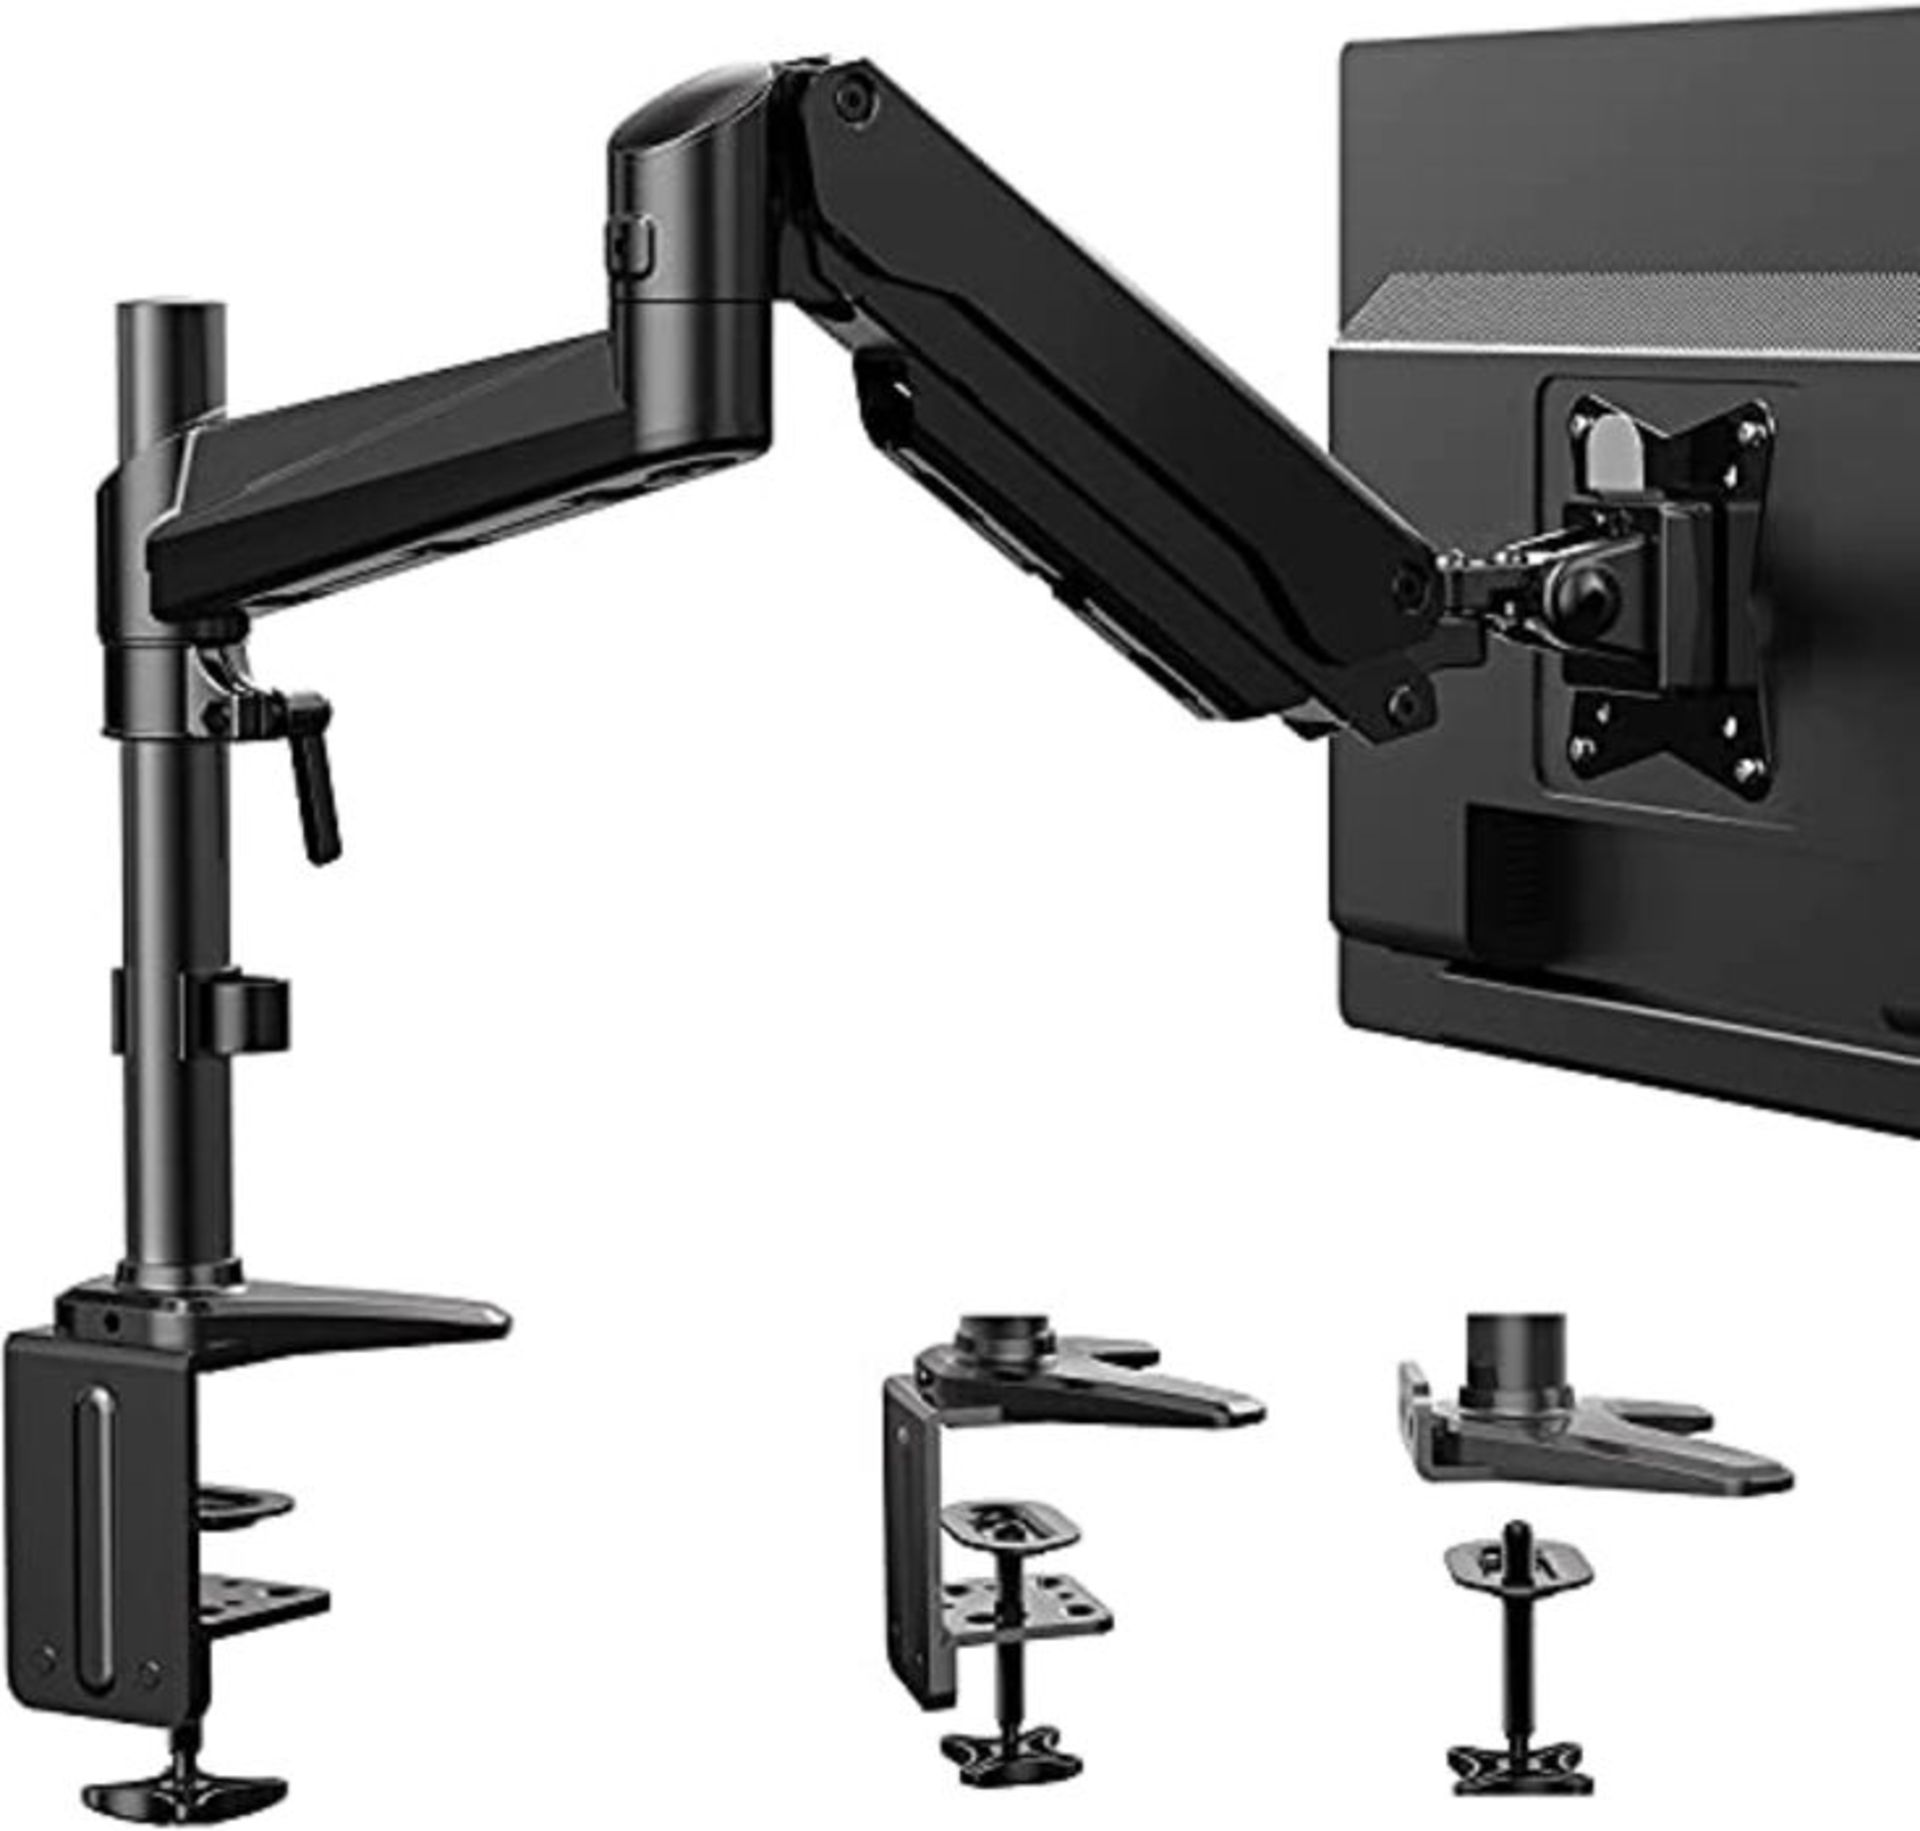 Huanuo 17-32? Monitor Mount Stand - Single Arm Gas Spring Monitor Desk Mount Height Ad